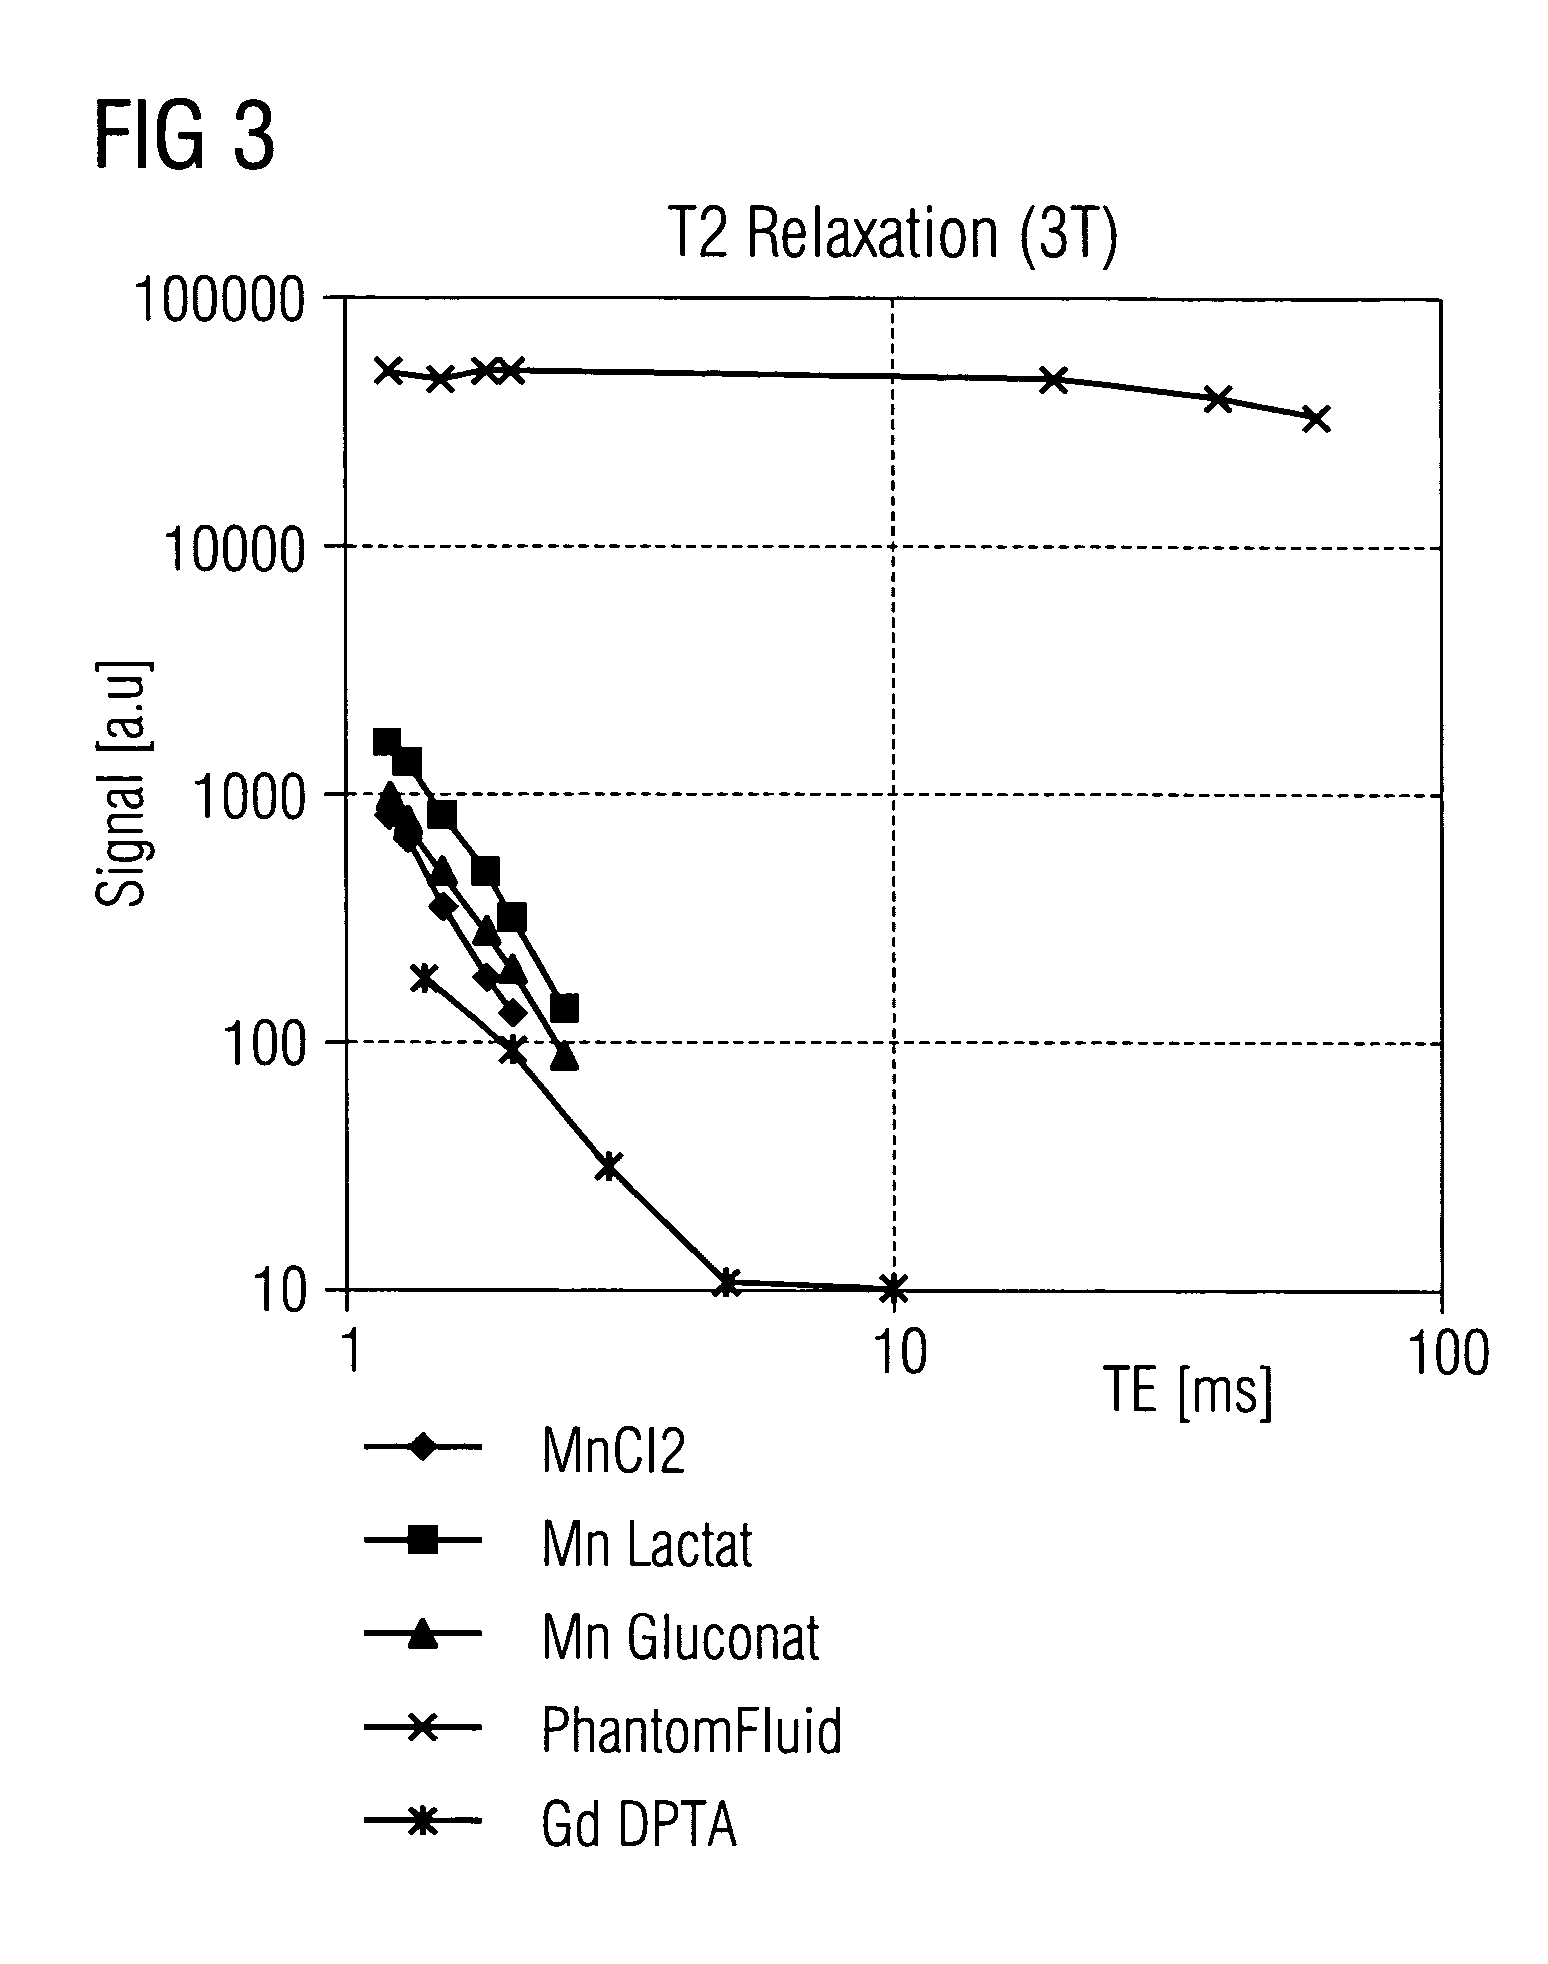 Water-soluble paramagnetic substance reducing the relaxation time of the coolant in an MRI system